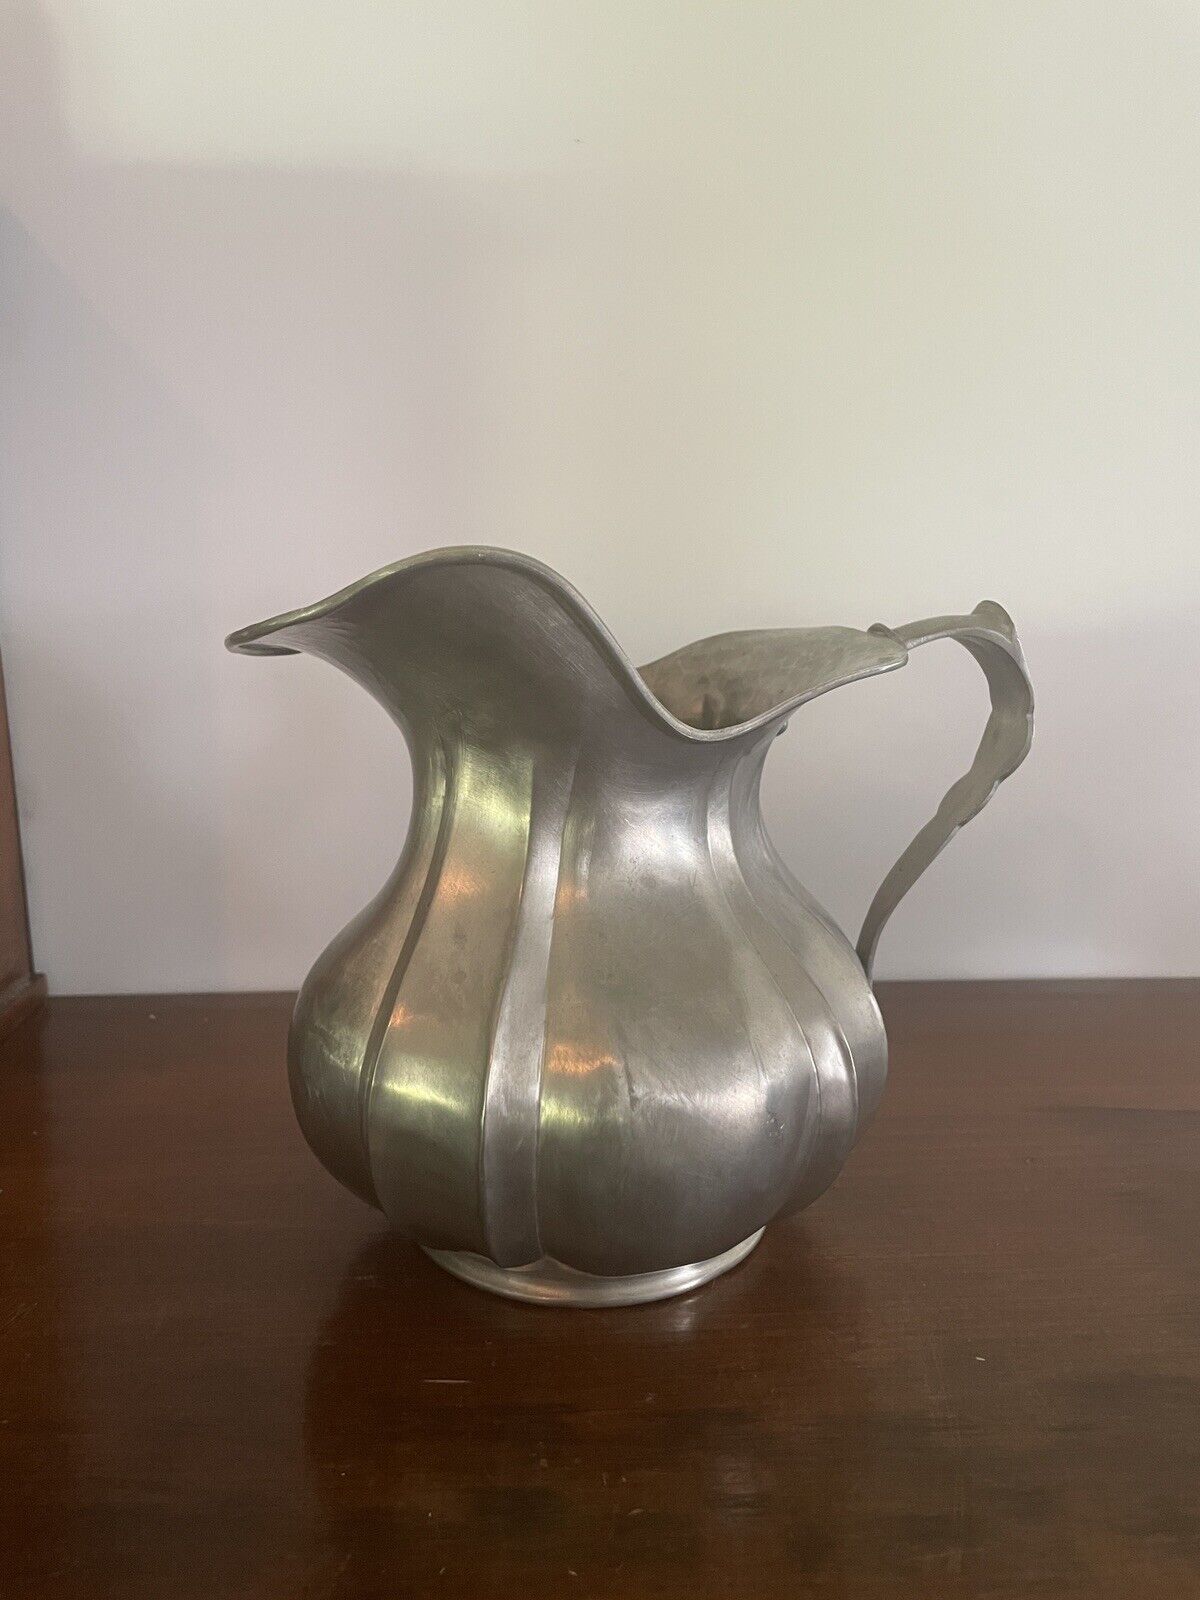 Pewter Italy Large Pitcher PELTRO 95% ETAIN Pour Lavorazio Mano Hand Crafted